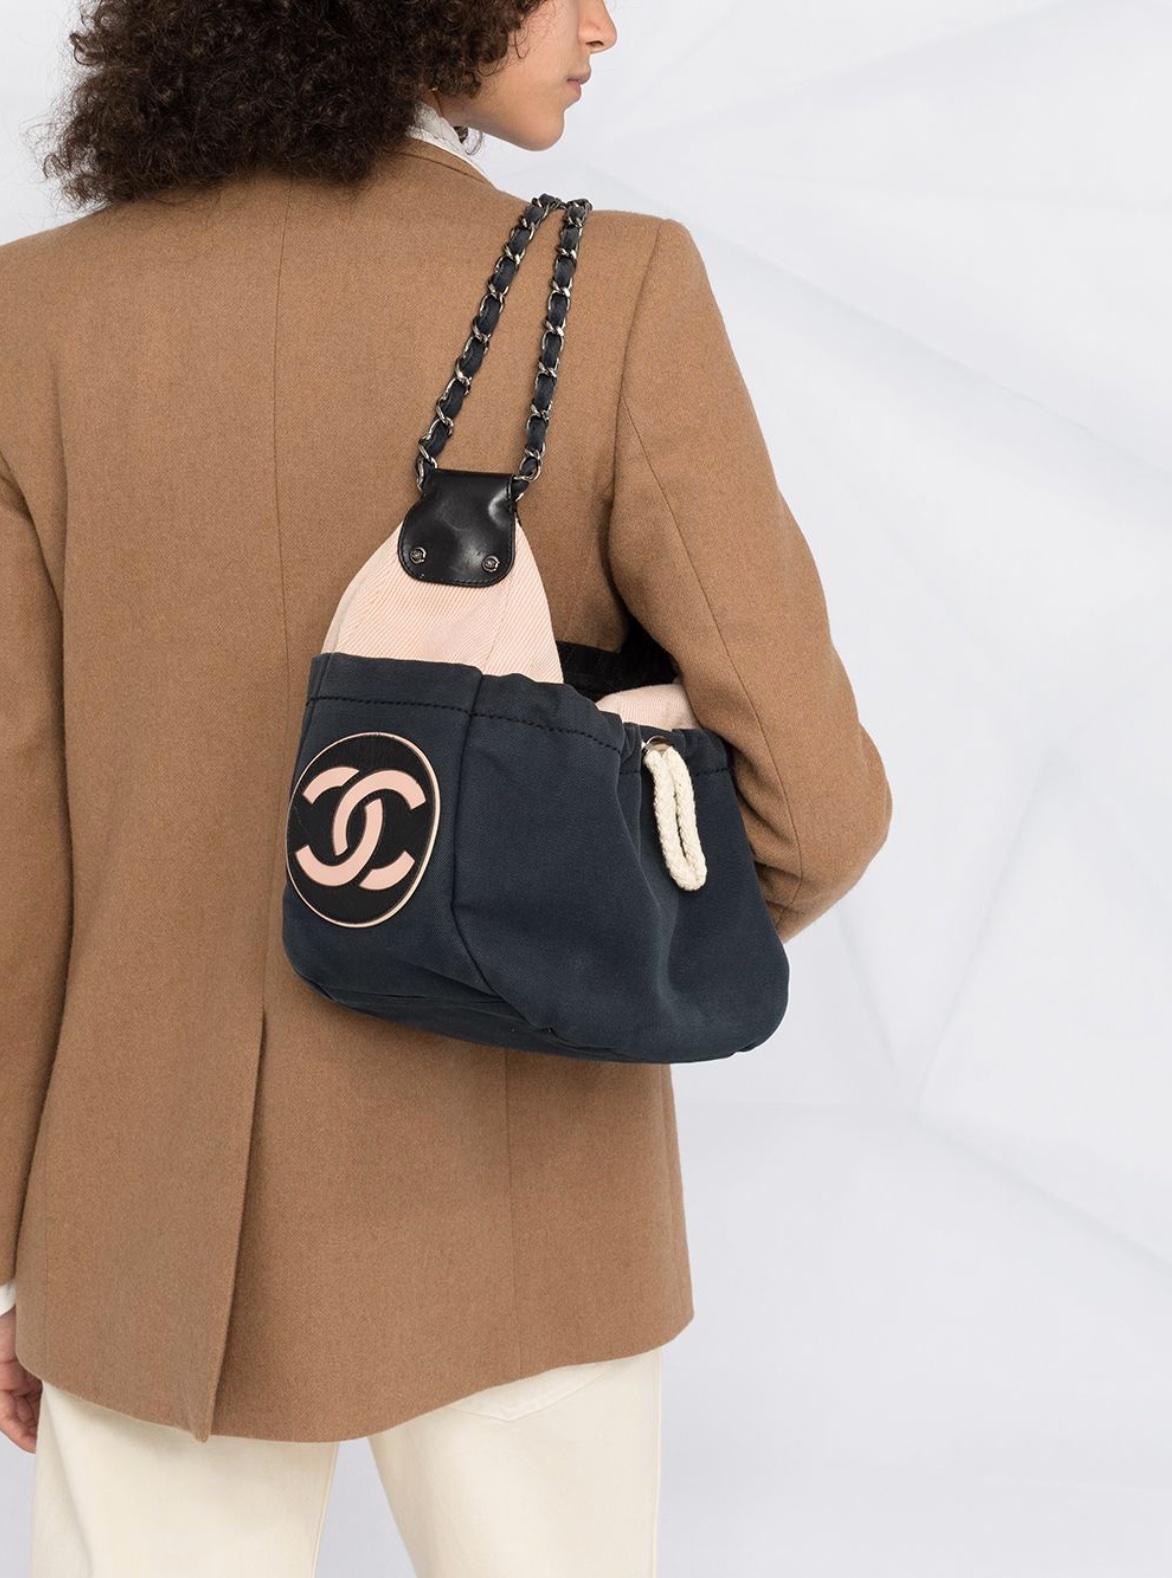 Chanel Cruise Sailing Yacht Boating Rope Cotton Pochette Hobo Shoulder Bag 

Year: 2004

This nautical drawstring style shoulder bag features quilted leather around the zipper, two classic silver and canvas interwoven shoulder straps, and a CC logo